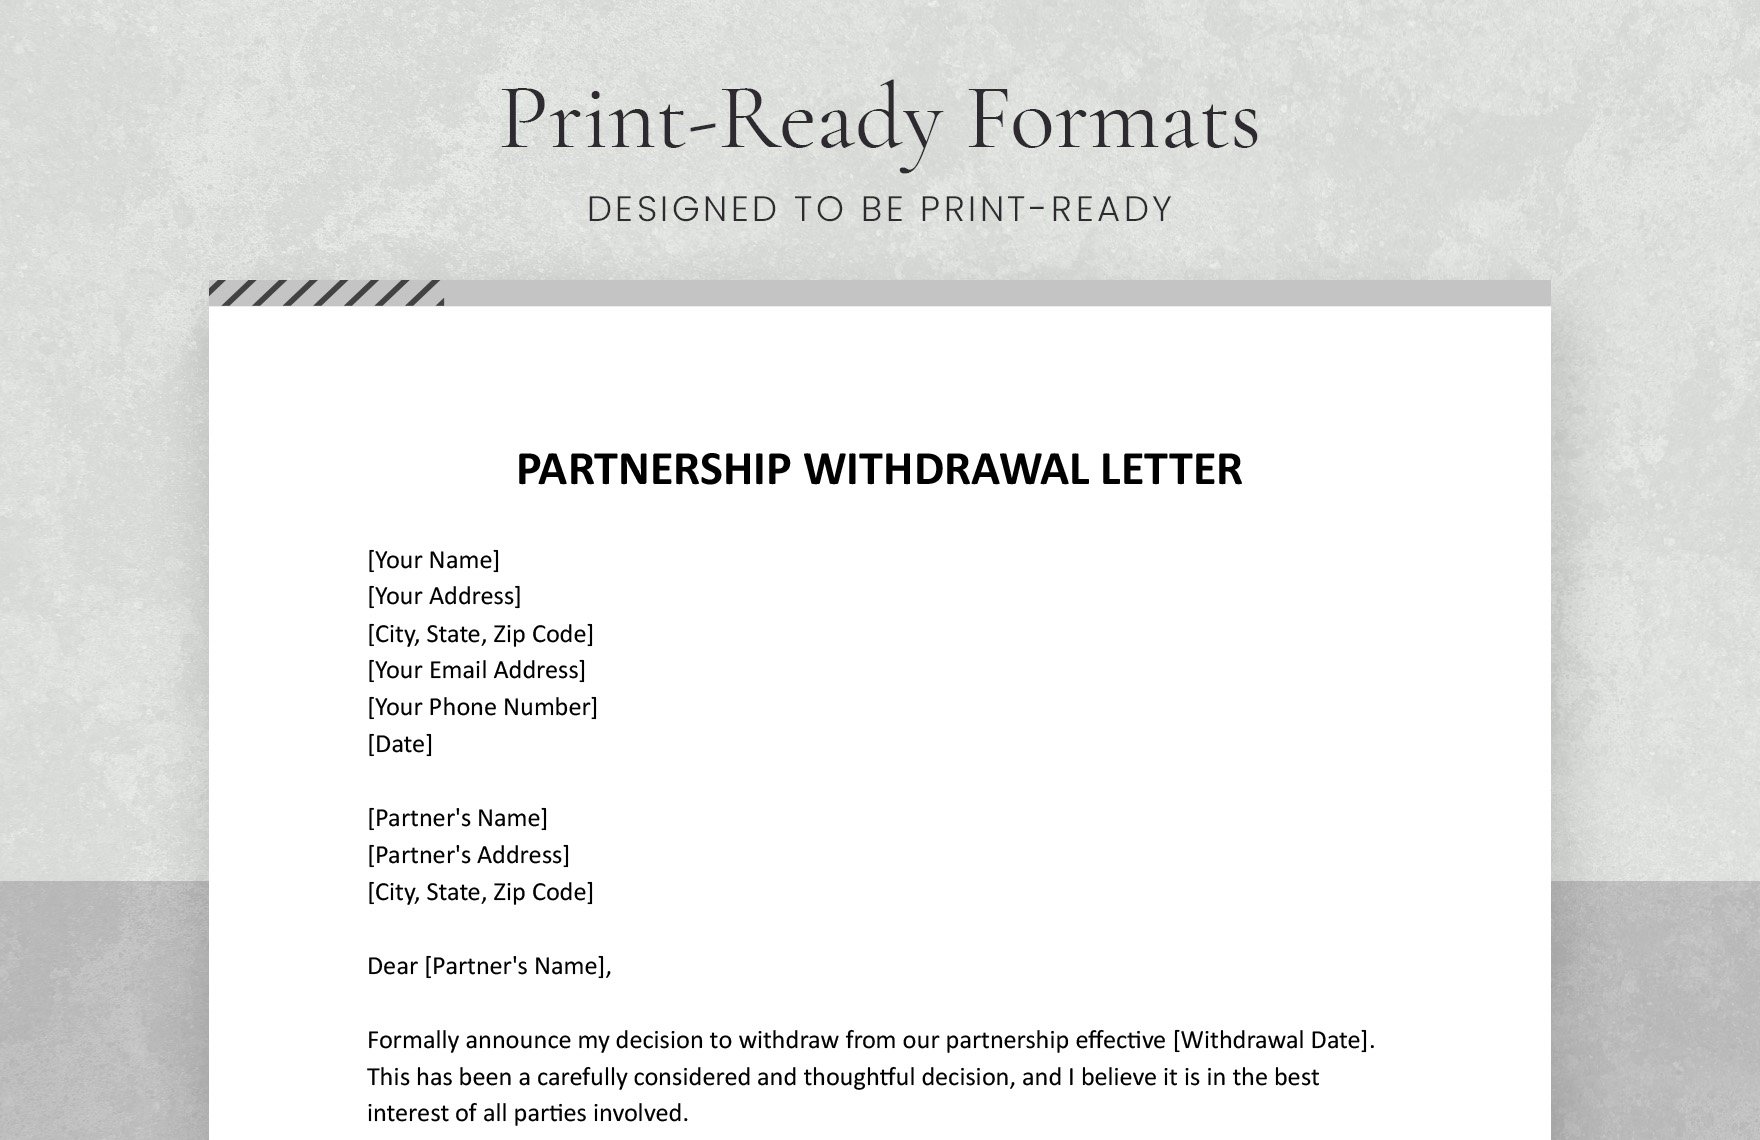 Partnership Withdrawal Letter